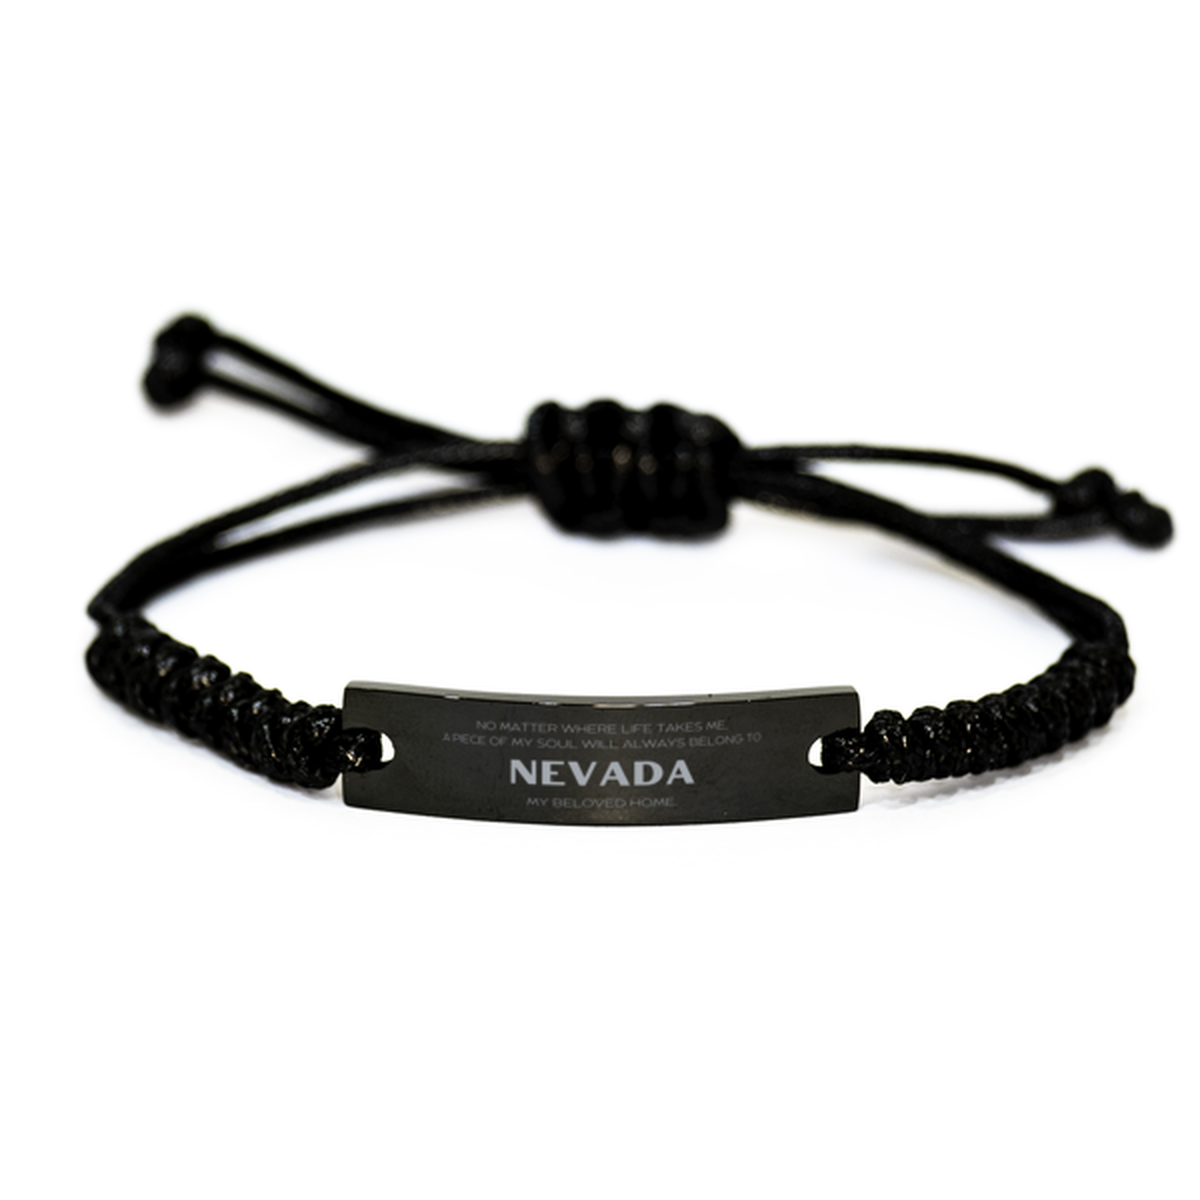 Love Nevada State Gifts, My soul will always belong to Nevada, Proud Black Rope Bracelet, Birthday Unique Gifts For Nevada Men, Women, Friends